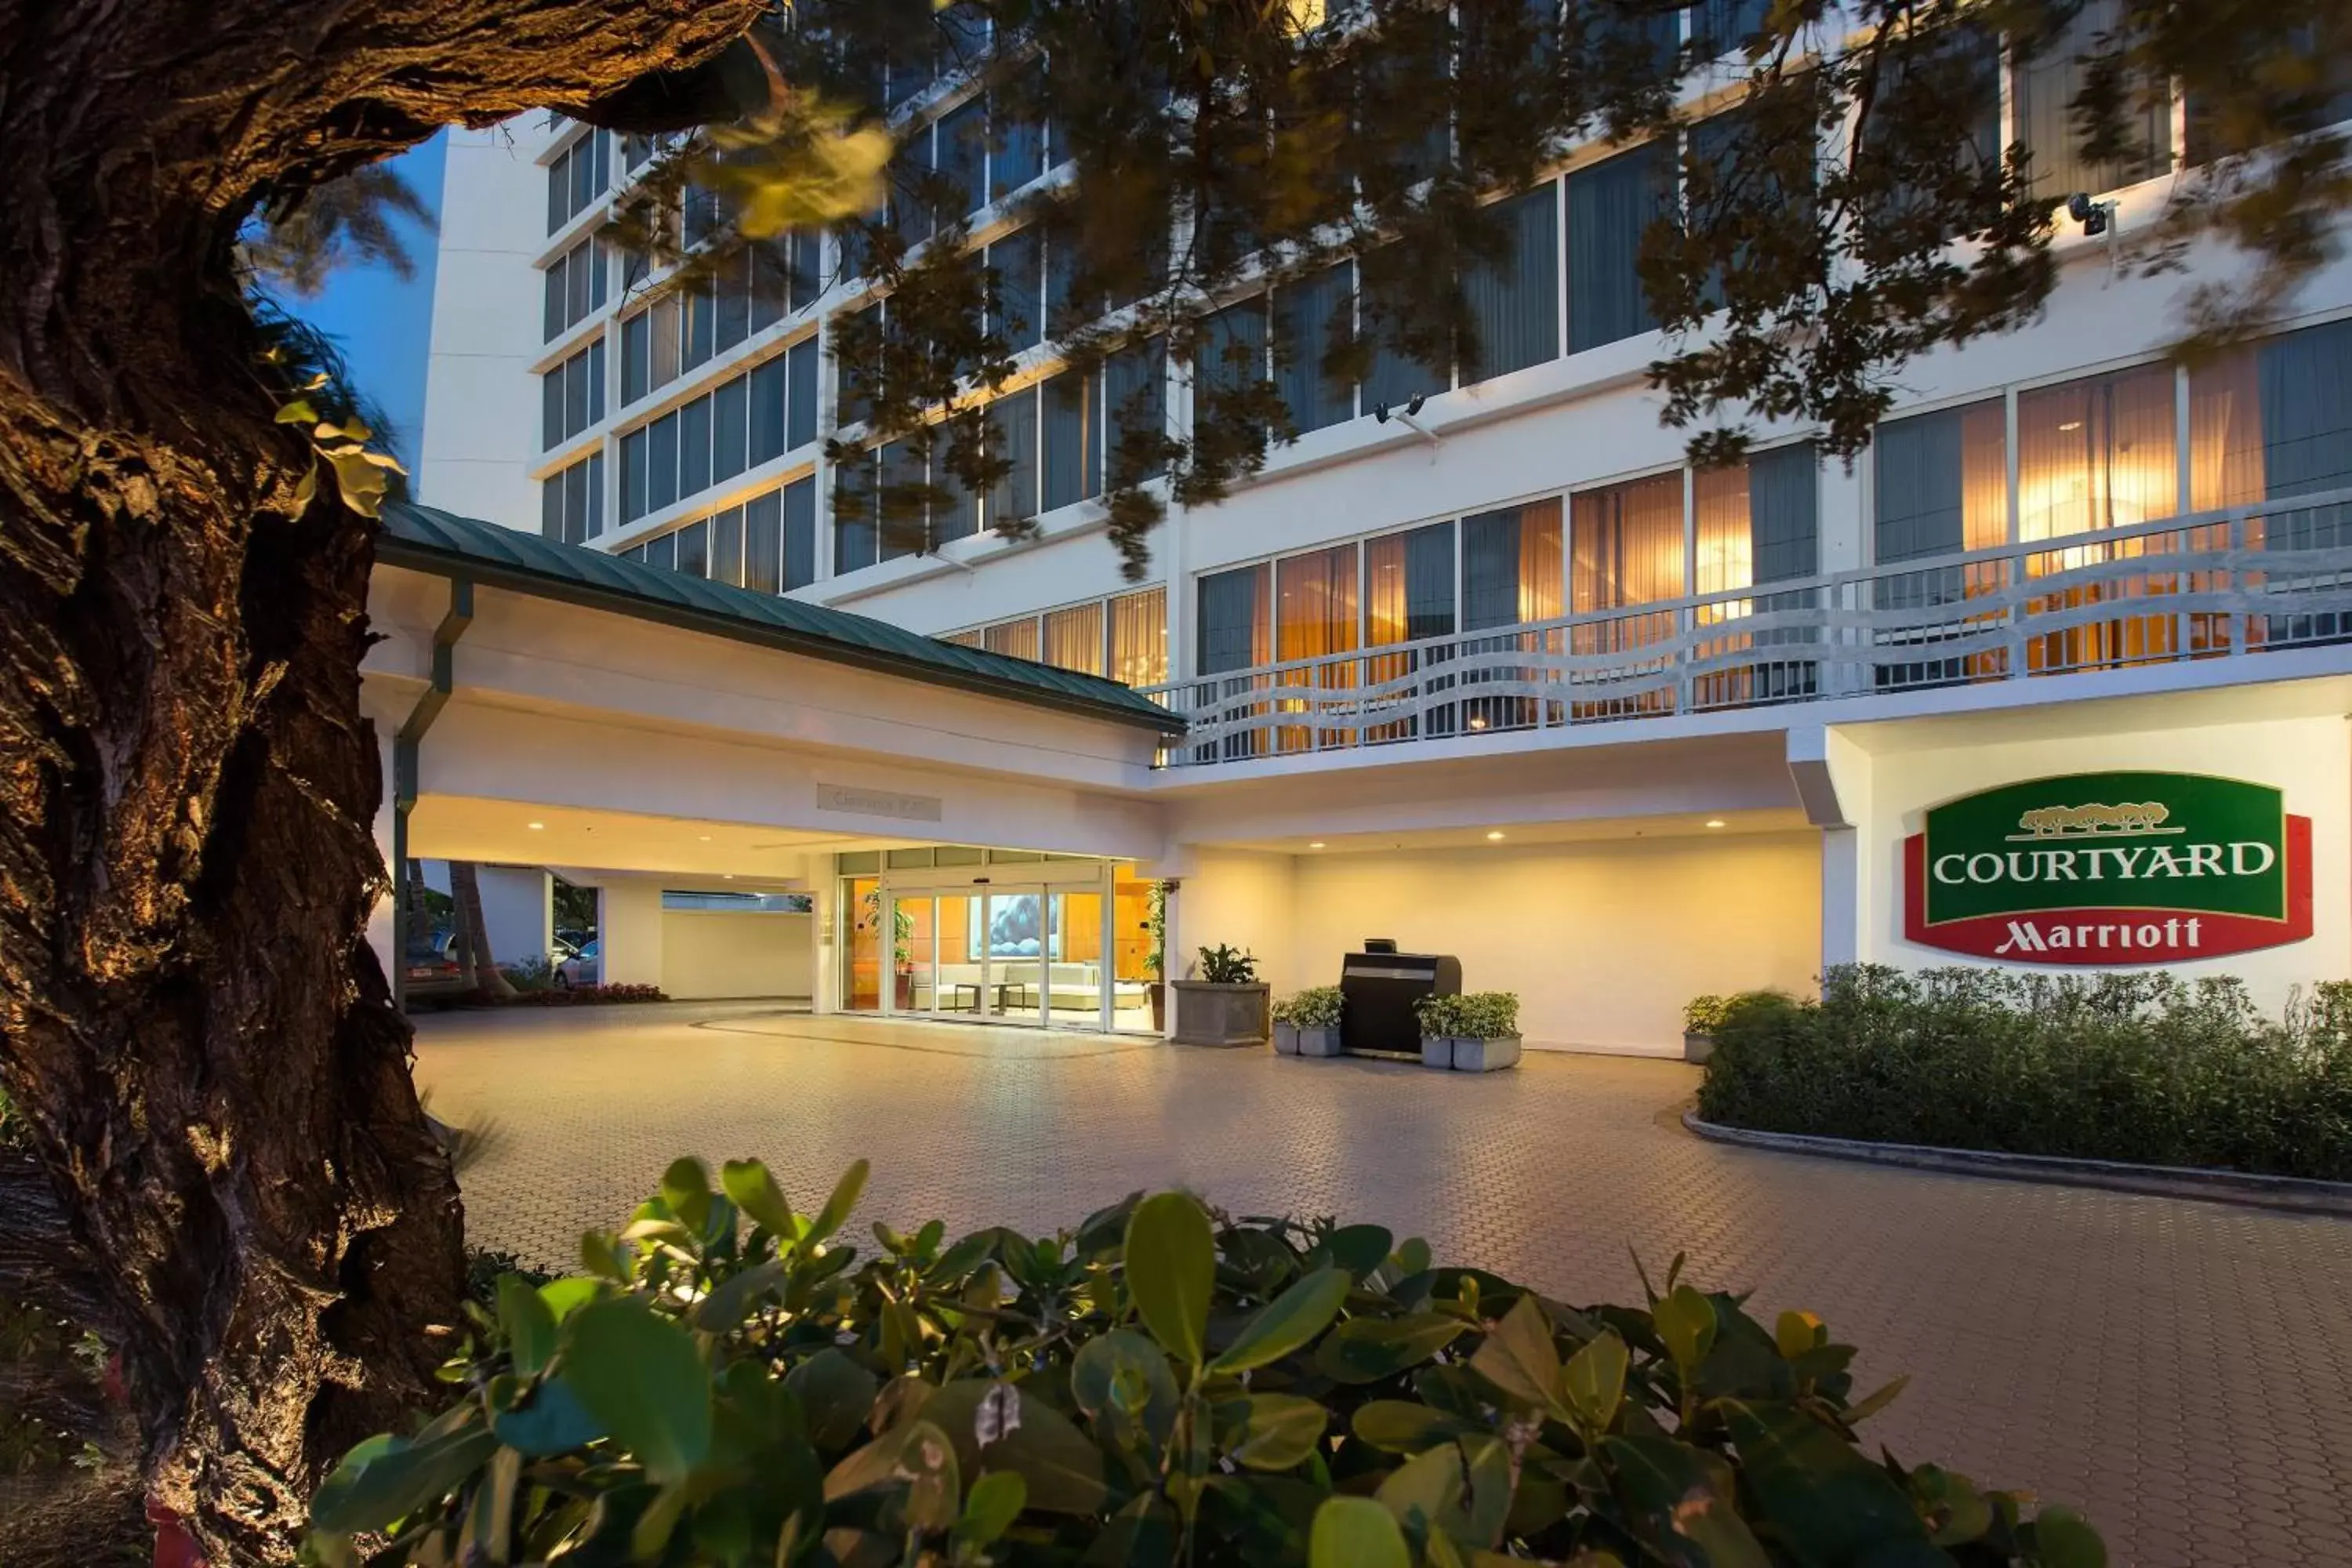 Property Building in Courtyard by Marriott Fort Lauderdale Beach